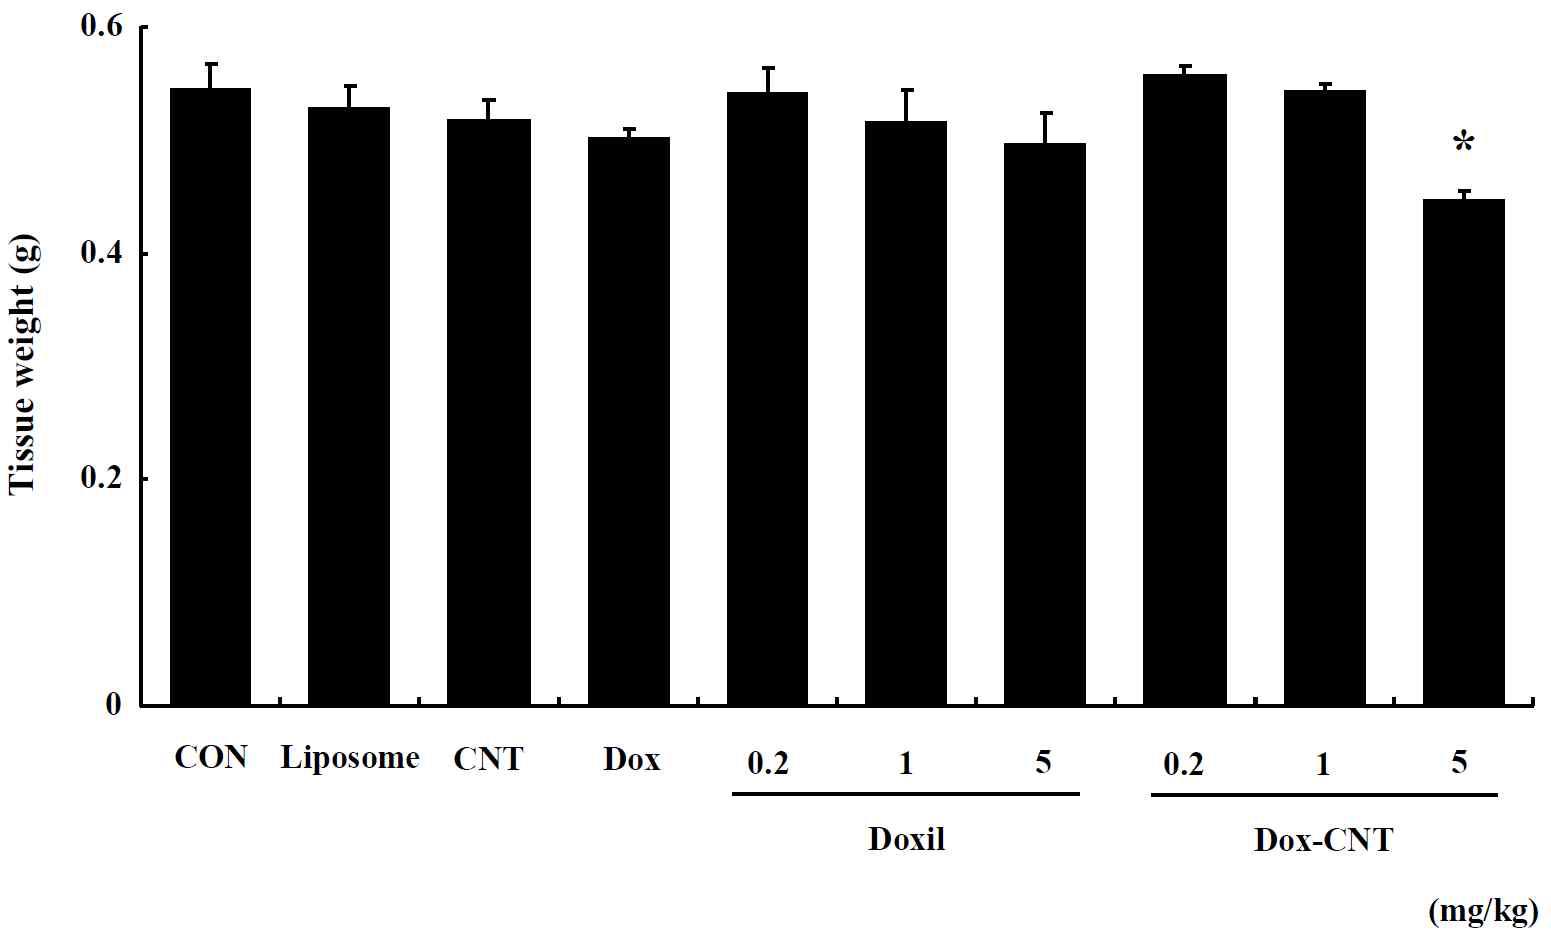 The change of kidney weight in single exposed male ICR mice for 14 days. Mice were respectively administered by intravenous injection with liposome, CNT, Dox, Doxil (0.2, 1, 5 mg/kg) and Dox-CNT (0.2, 1, 5 mg/kg). The results are presented as mean ± SE (n = 10). * p < 0.05, significantly different from the control.